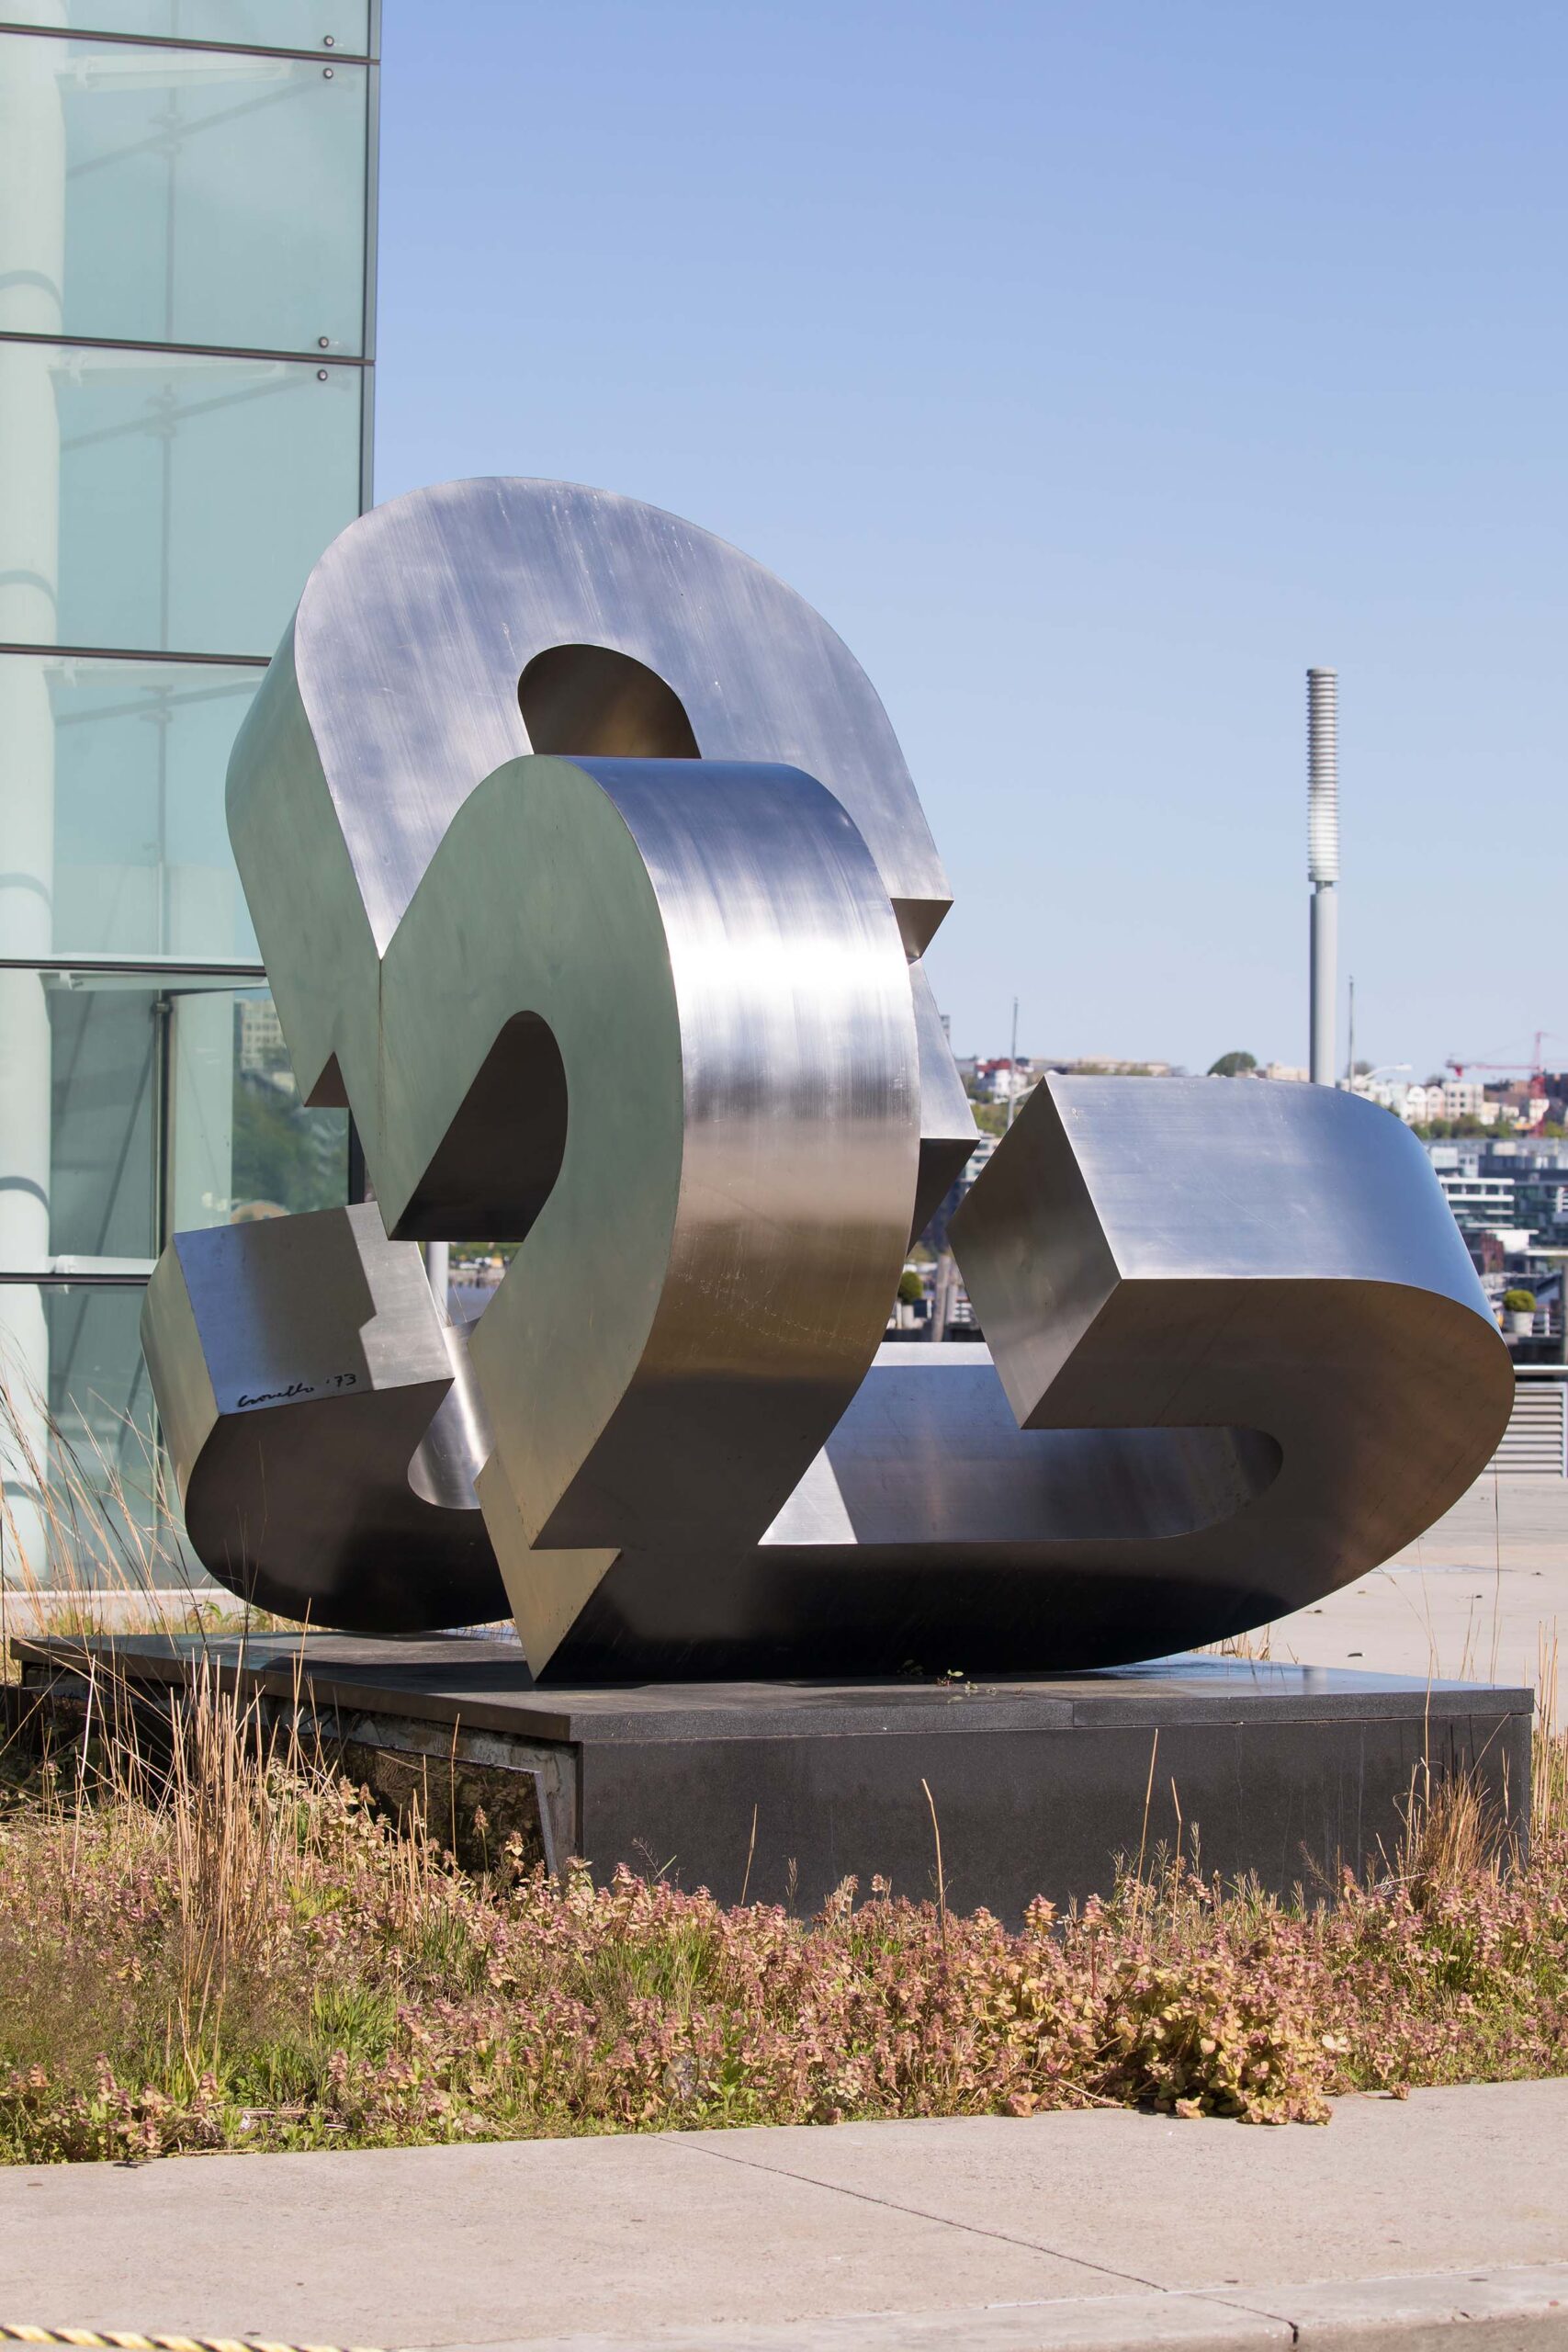 The art piece SENES sits on Pier 79, a steel structure with round edges connected to each other